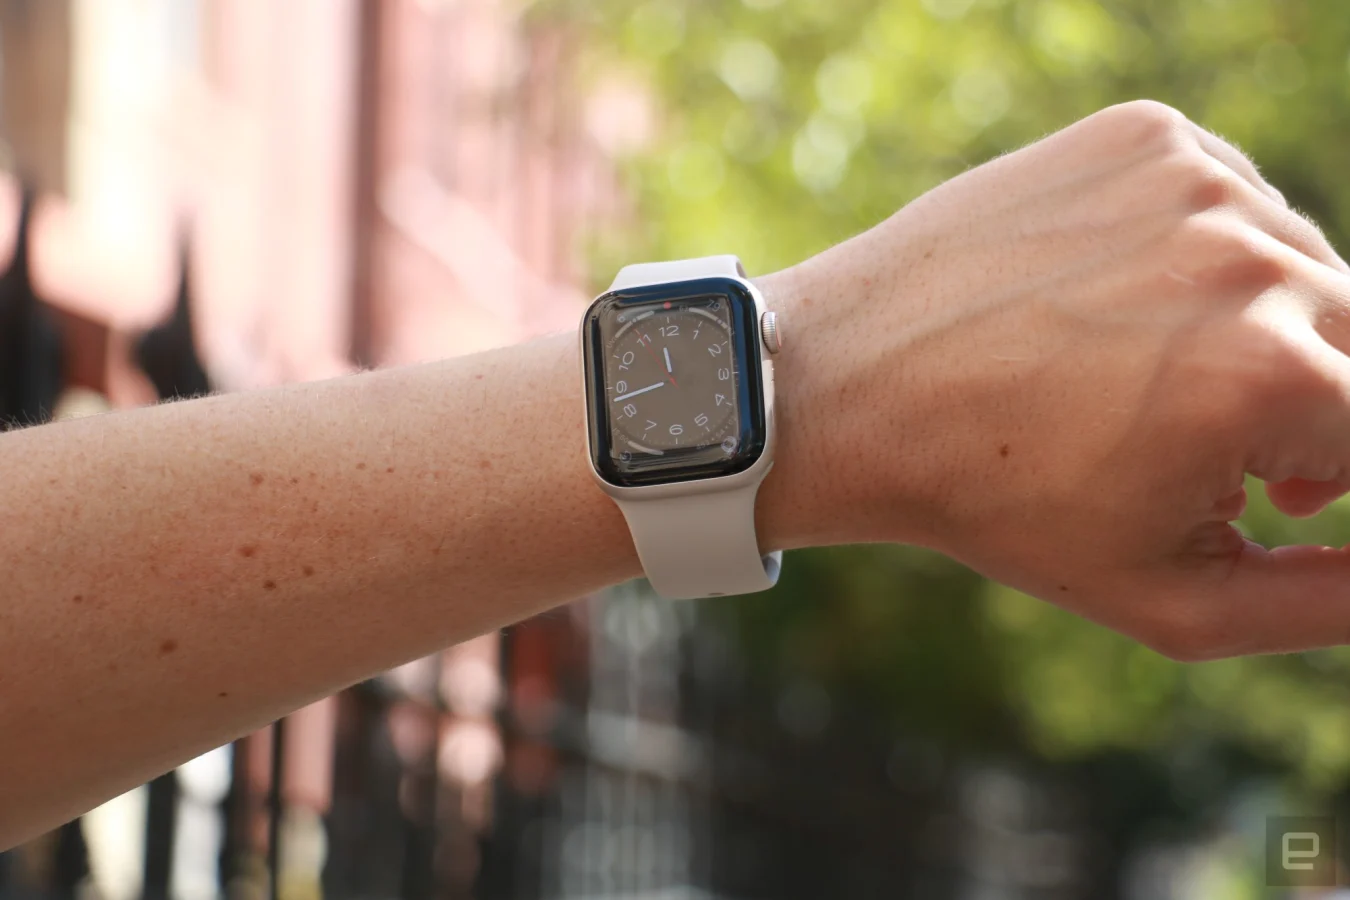 The Apple Watch SE (2022) on a person's wrist, held up in front of a red building and tree.